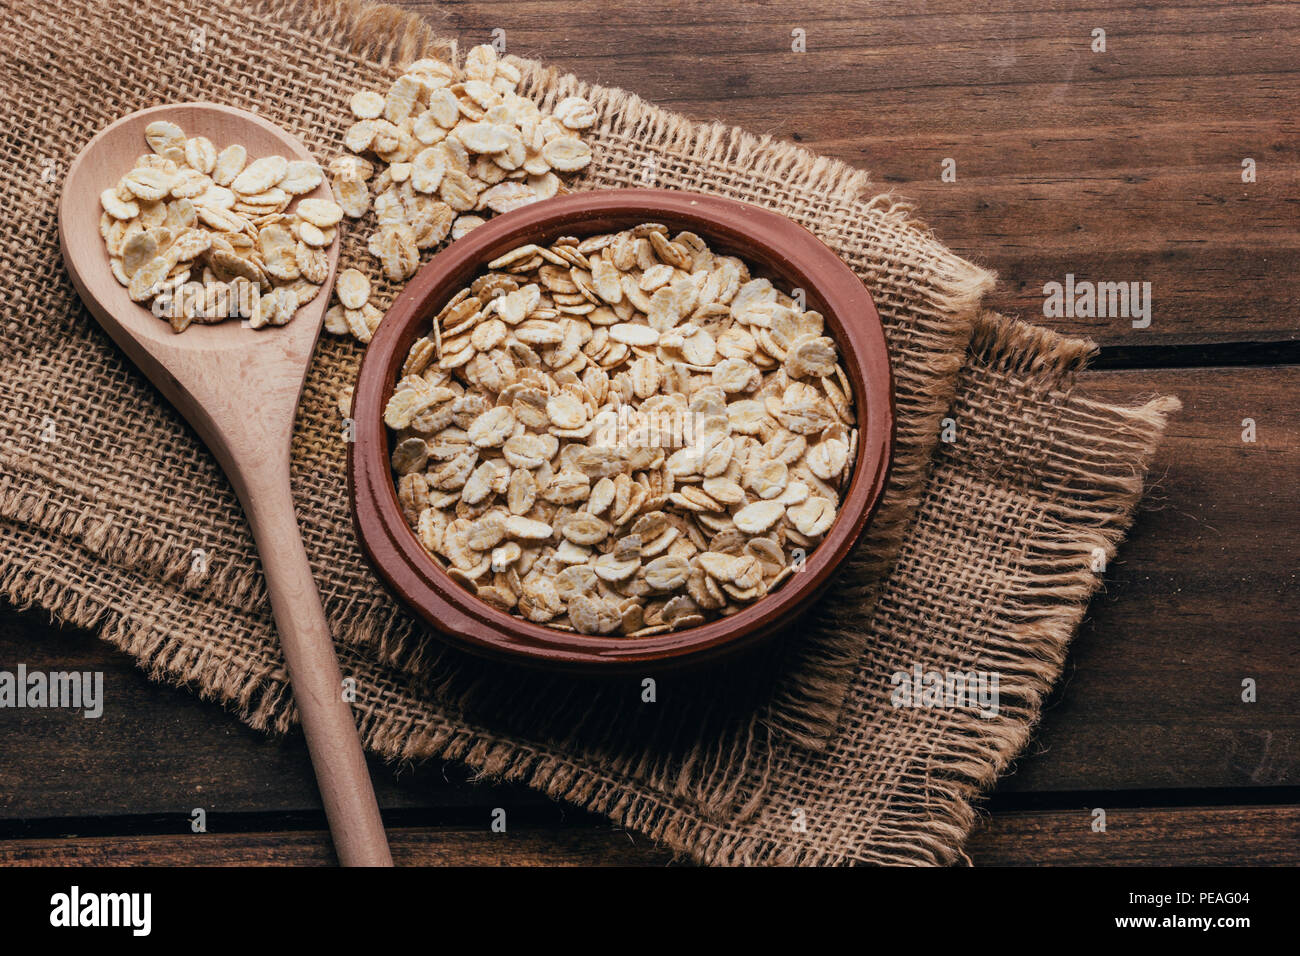 Container filled with uncooked oats, rustic style Stock Photo